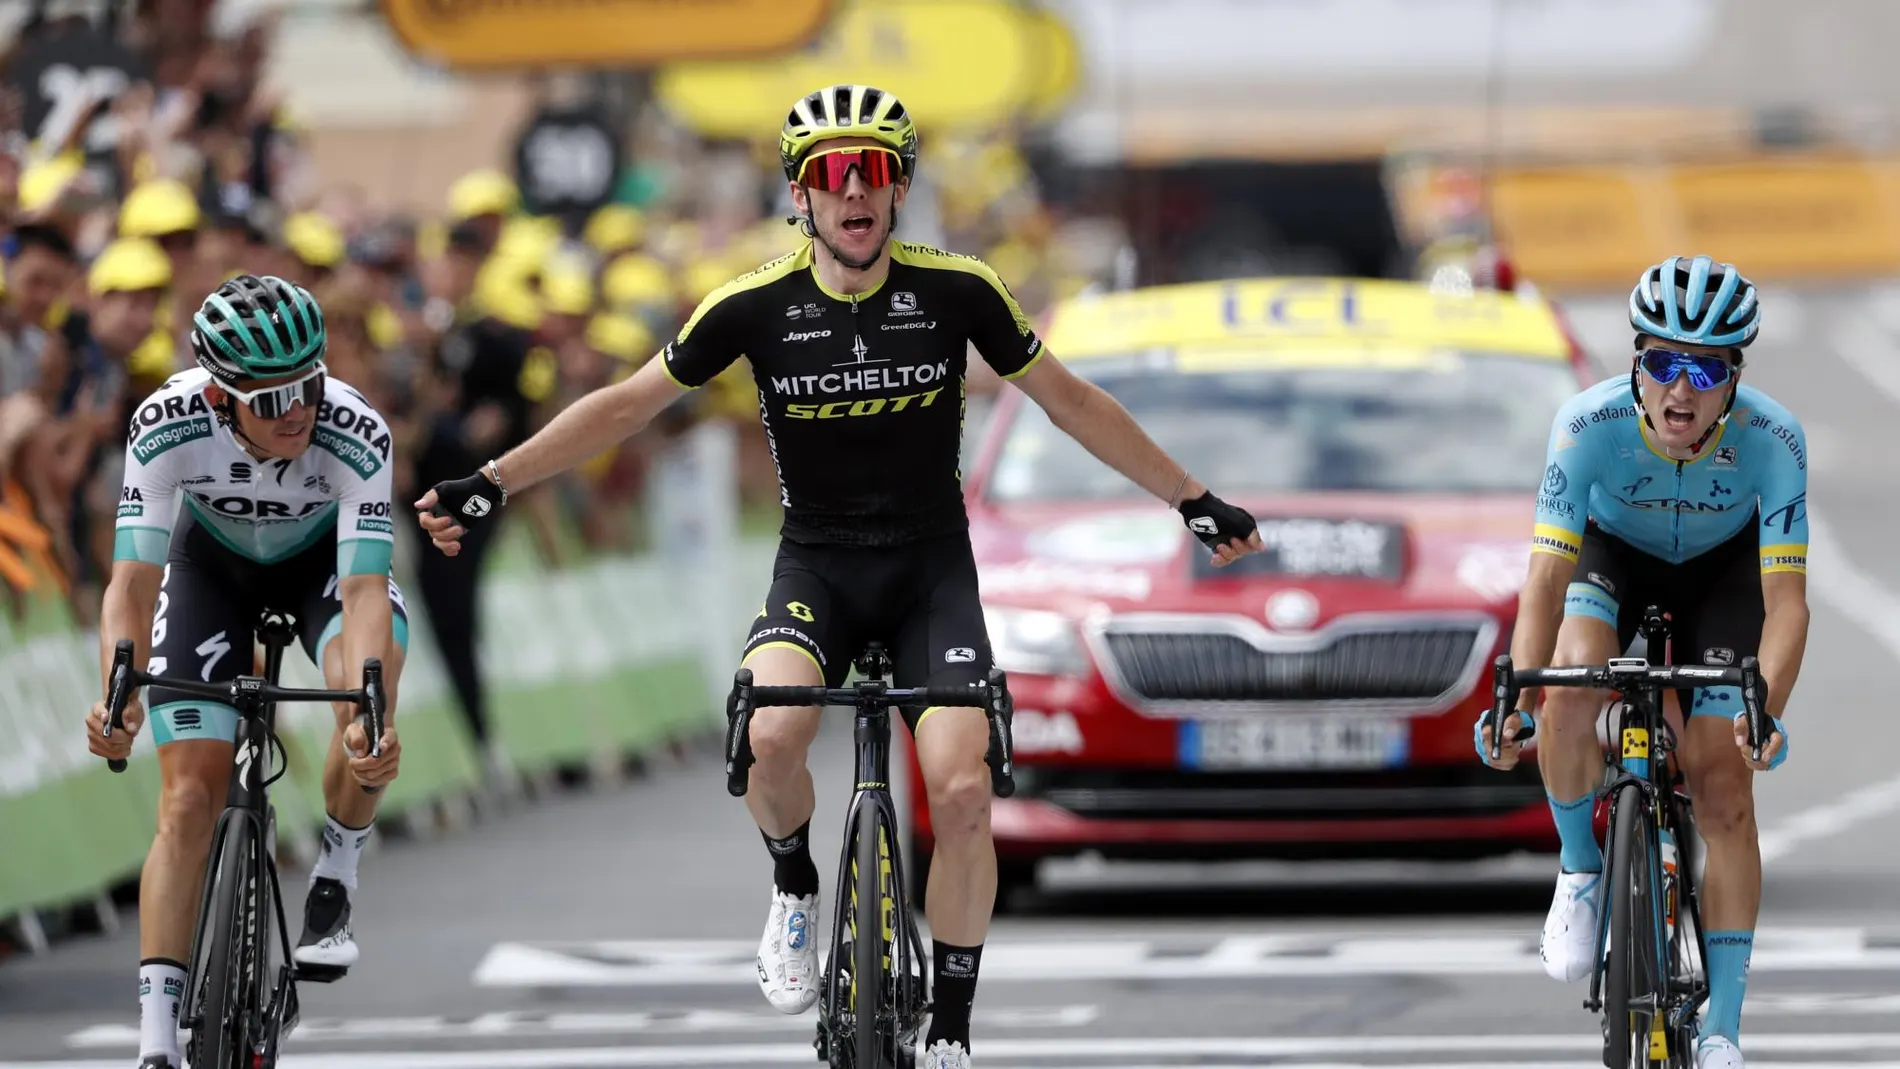 [and Austria's Gregor Muhlberger, celebrates as he crosses the finish line to win the twelfth stage of the Tour]